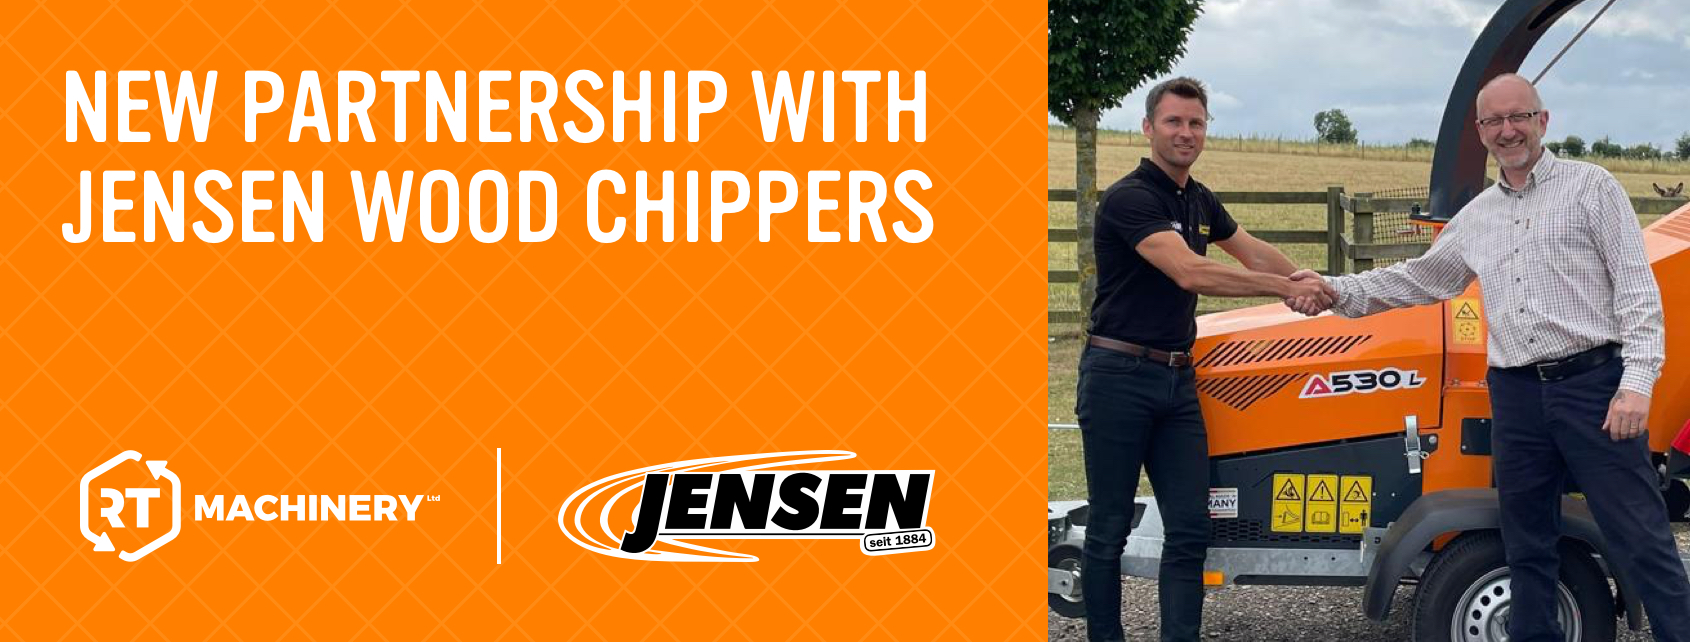 New Partnership with Jensen Wood Chippers